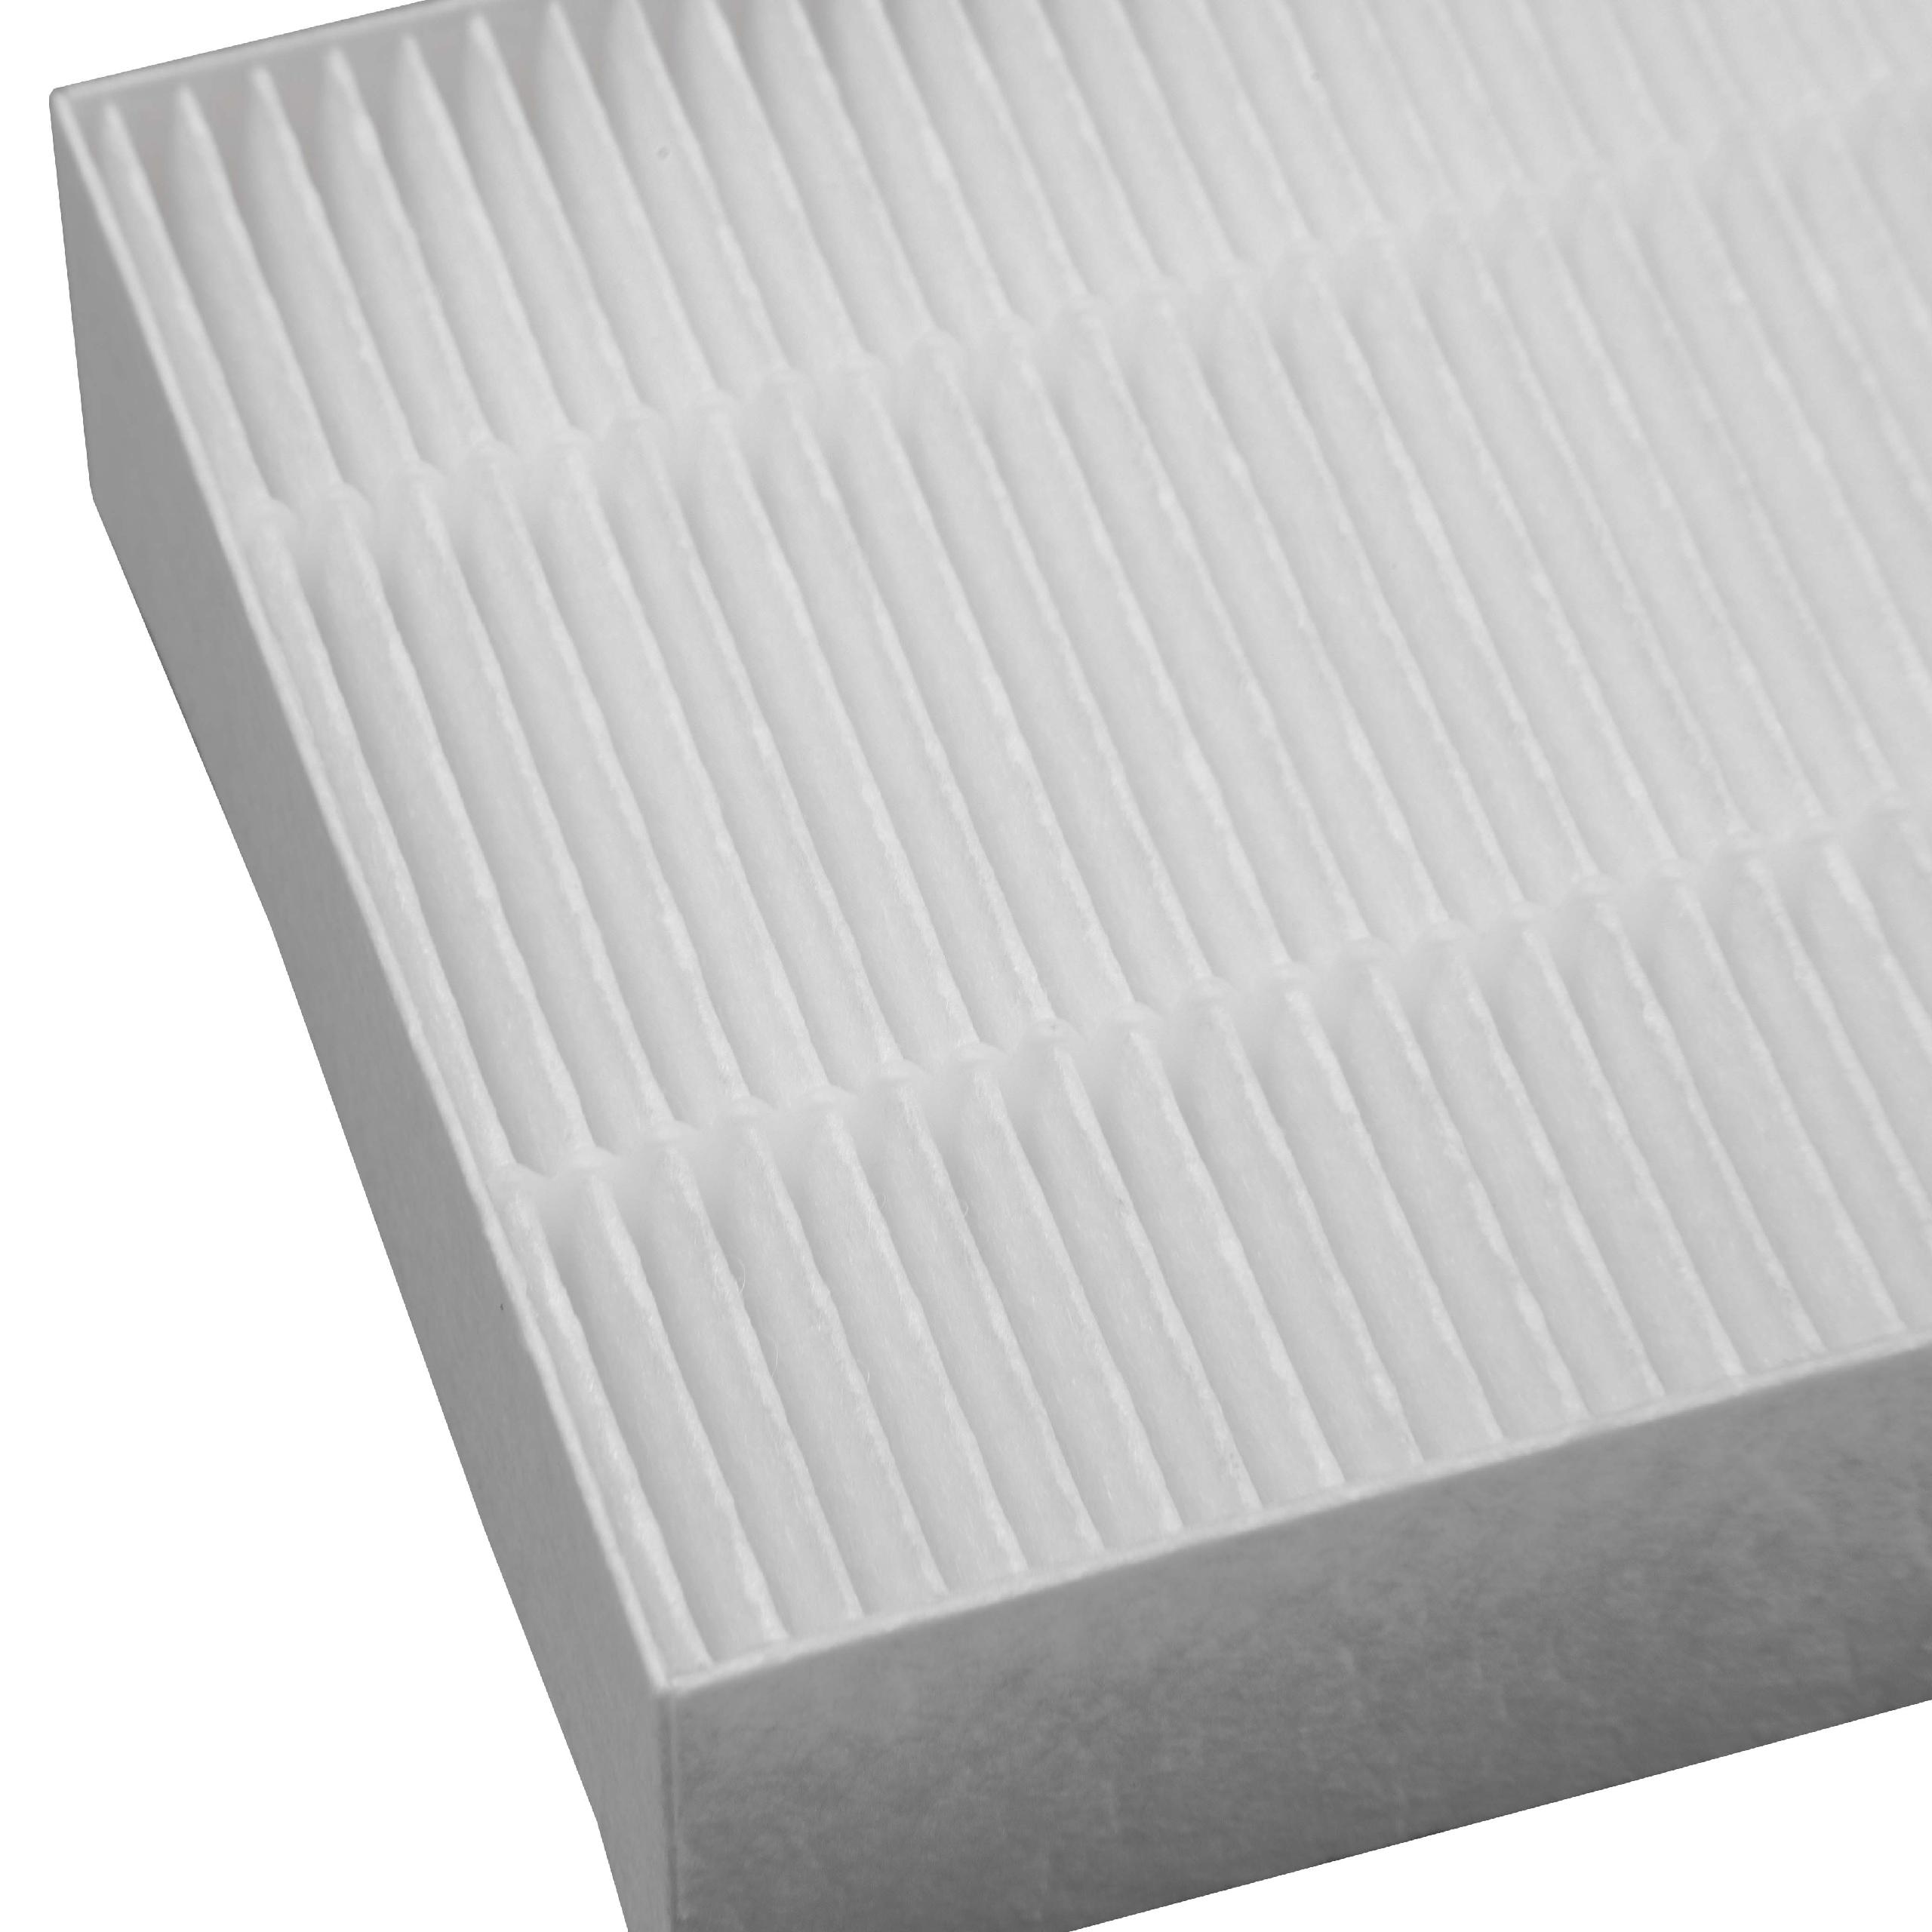 vhbw HEPA Filter Replacement for DAHLE 80901-11708 for Air Cleaner - Spare Air Filter